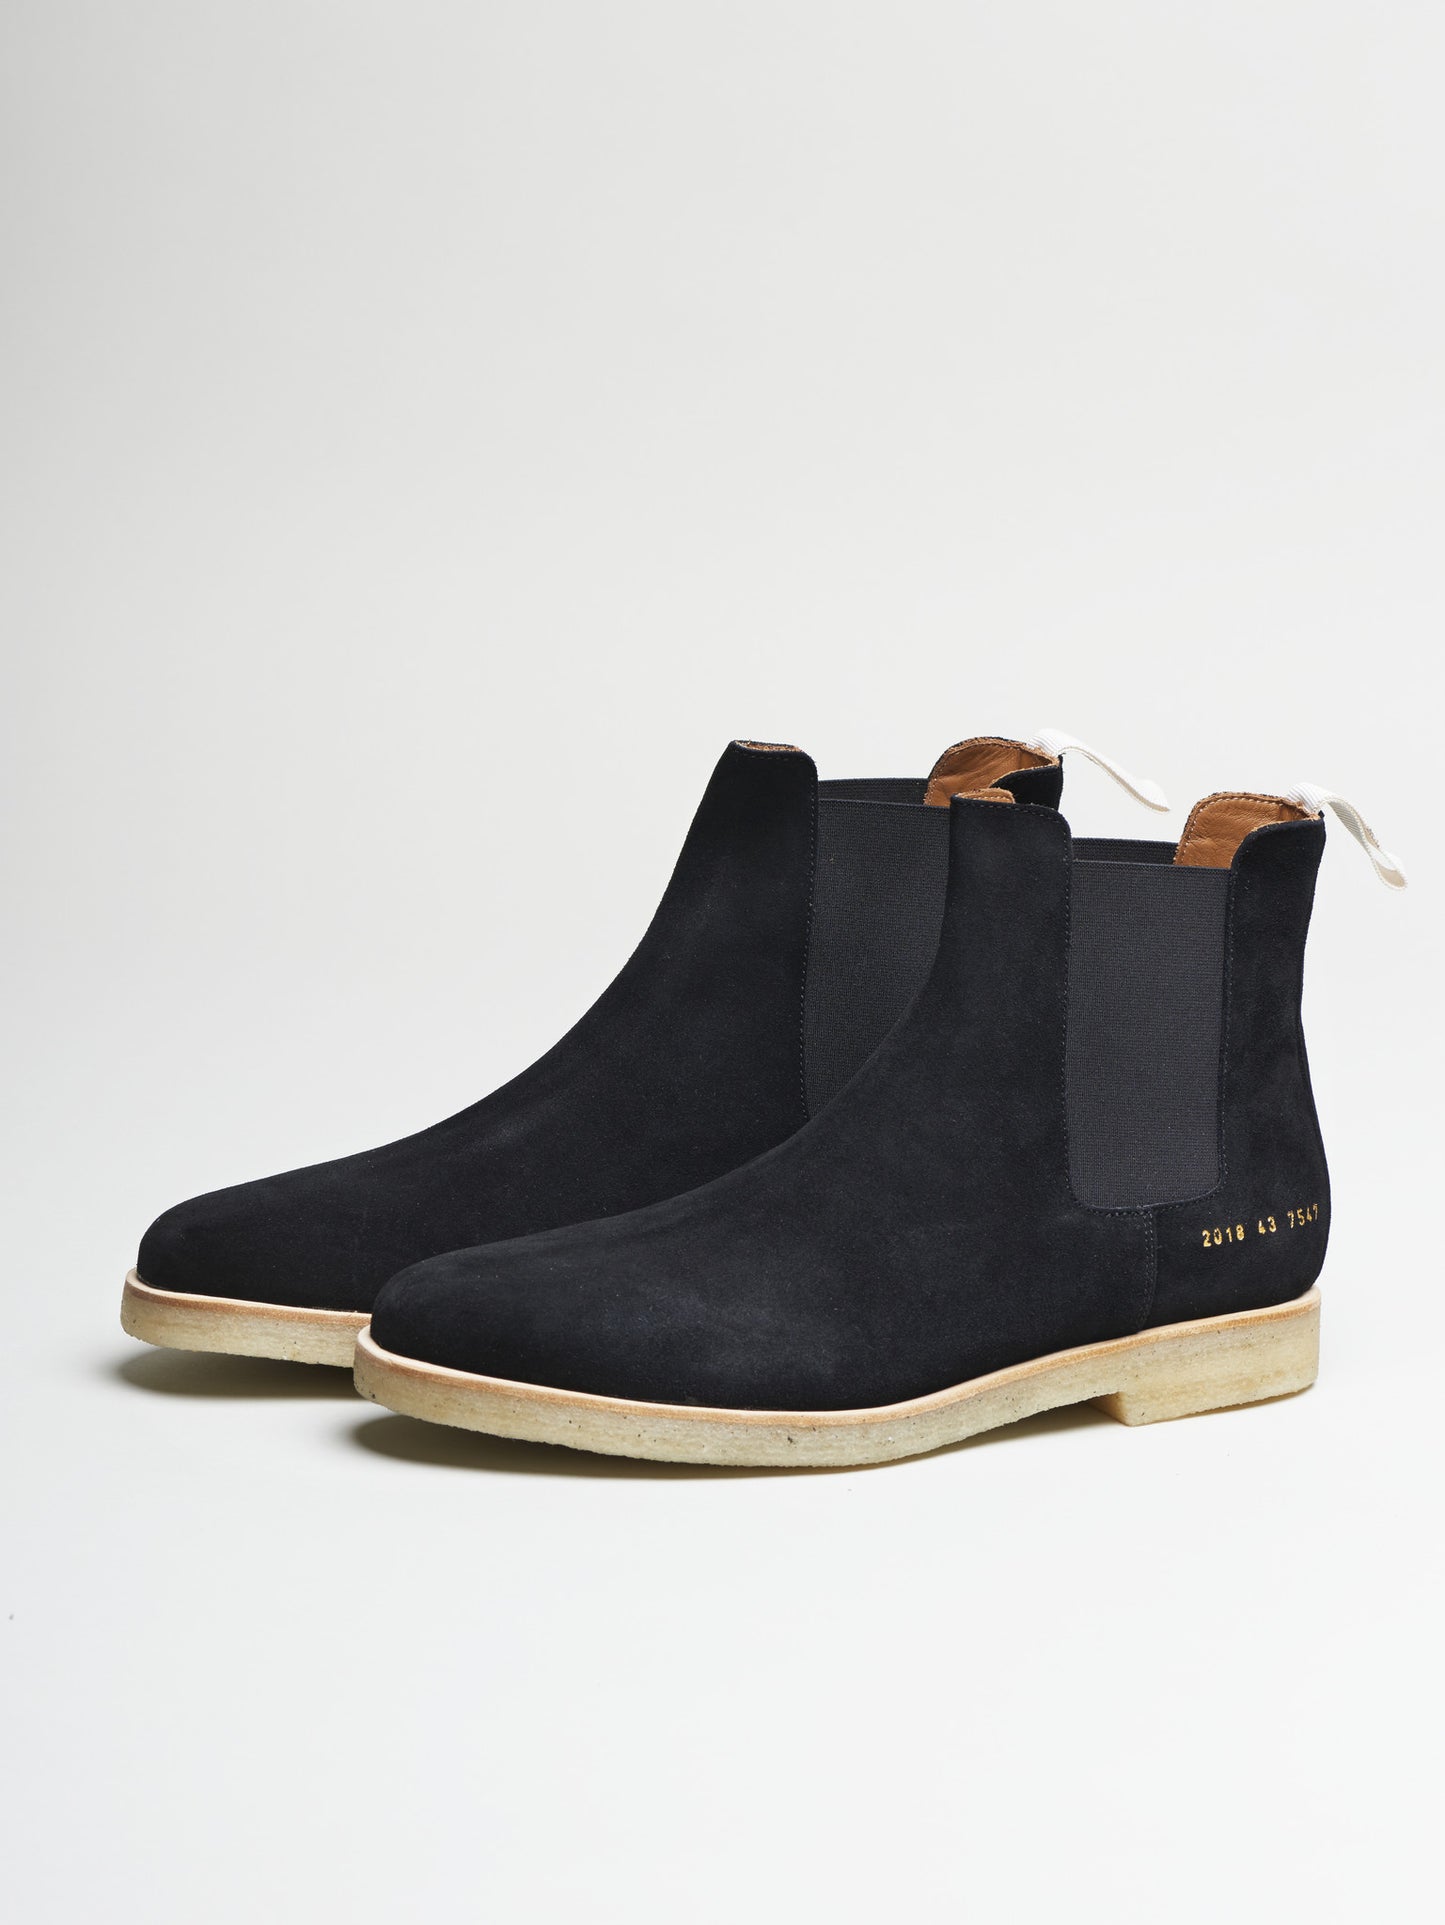 Loyalty Offer Chelsea Boot, Black Suede - Goods